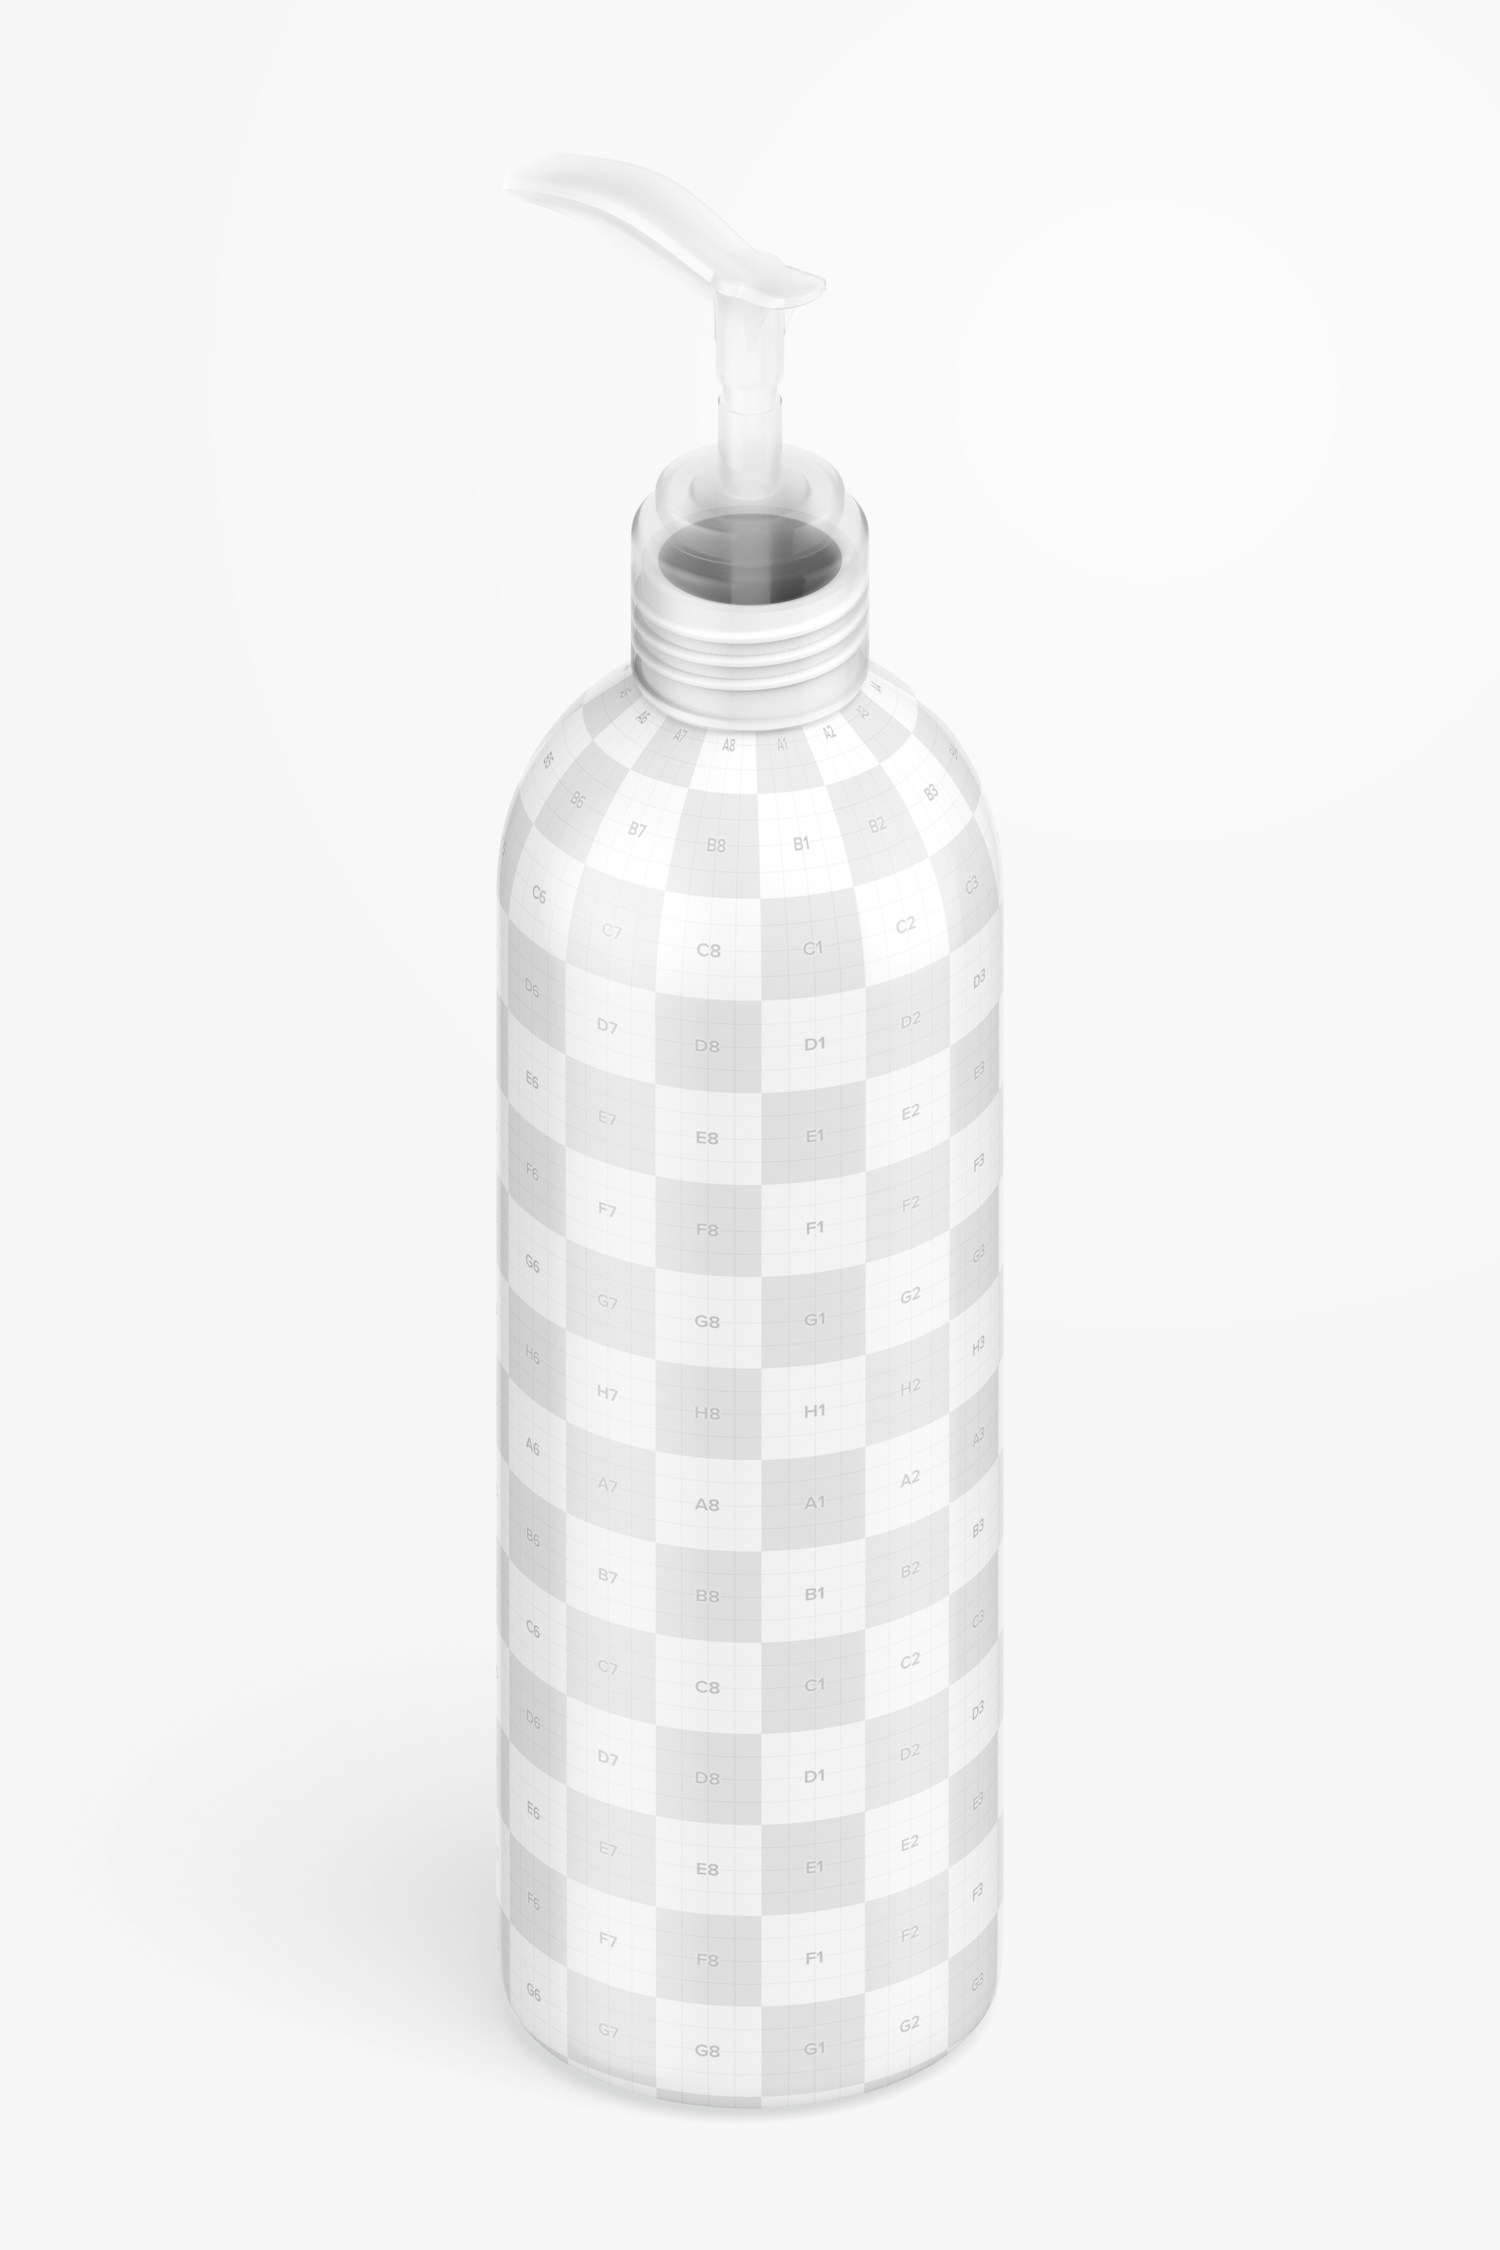 12 oz Pump Rounded Bottle 02 Mockup, Isometric Right View